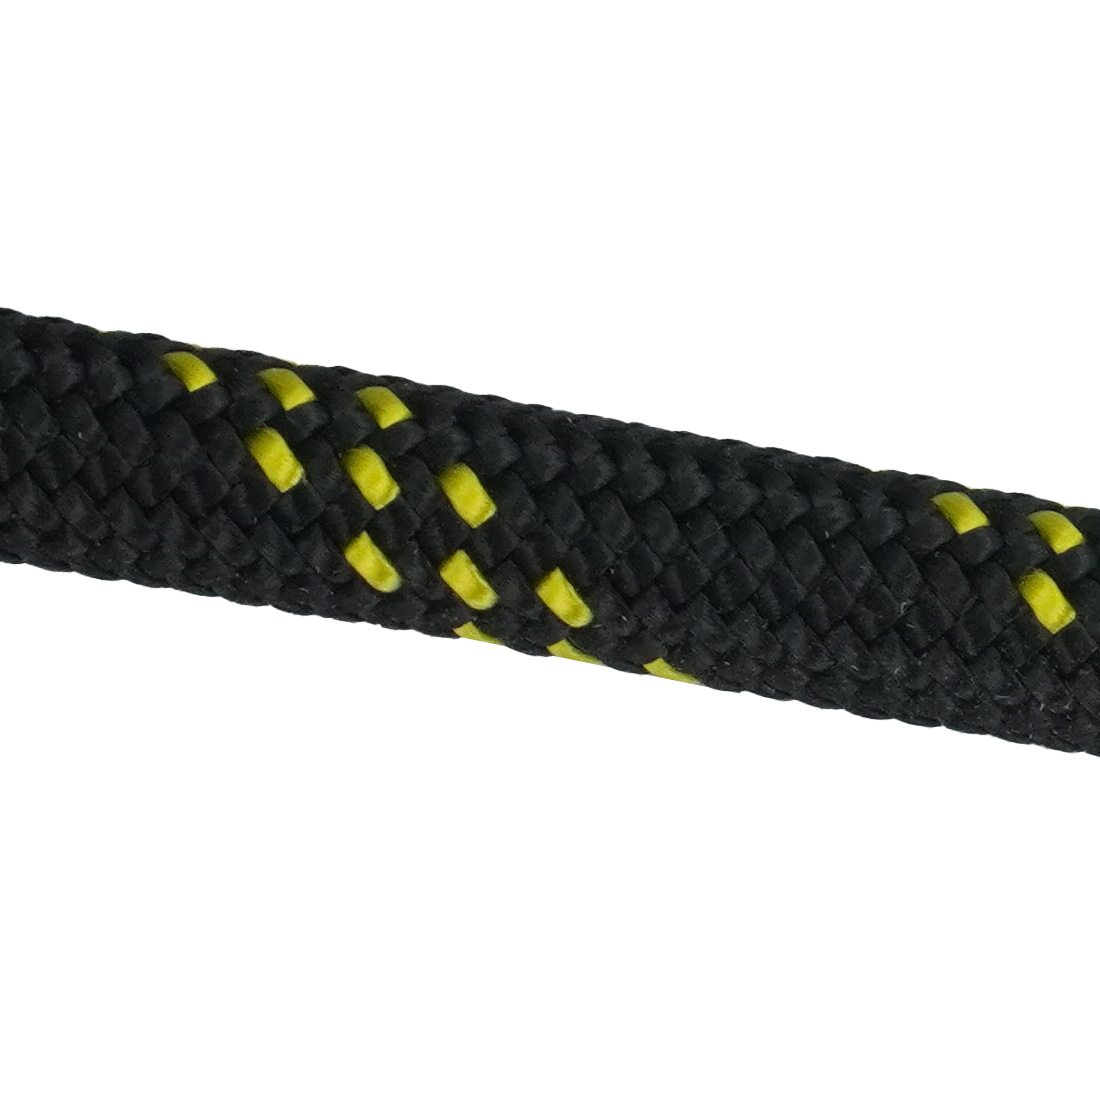 New England Rope KM III MAX - 7/16 Inch Zoomed View